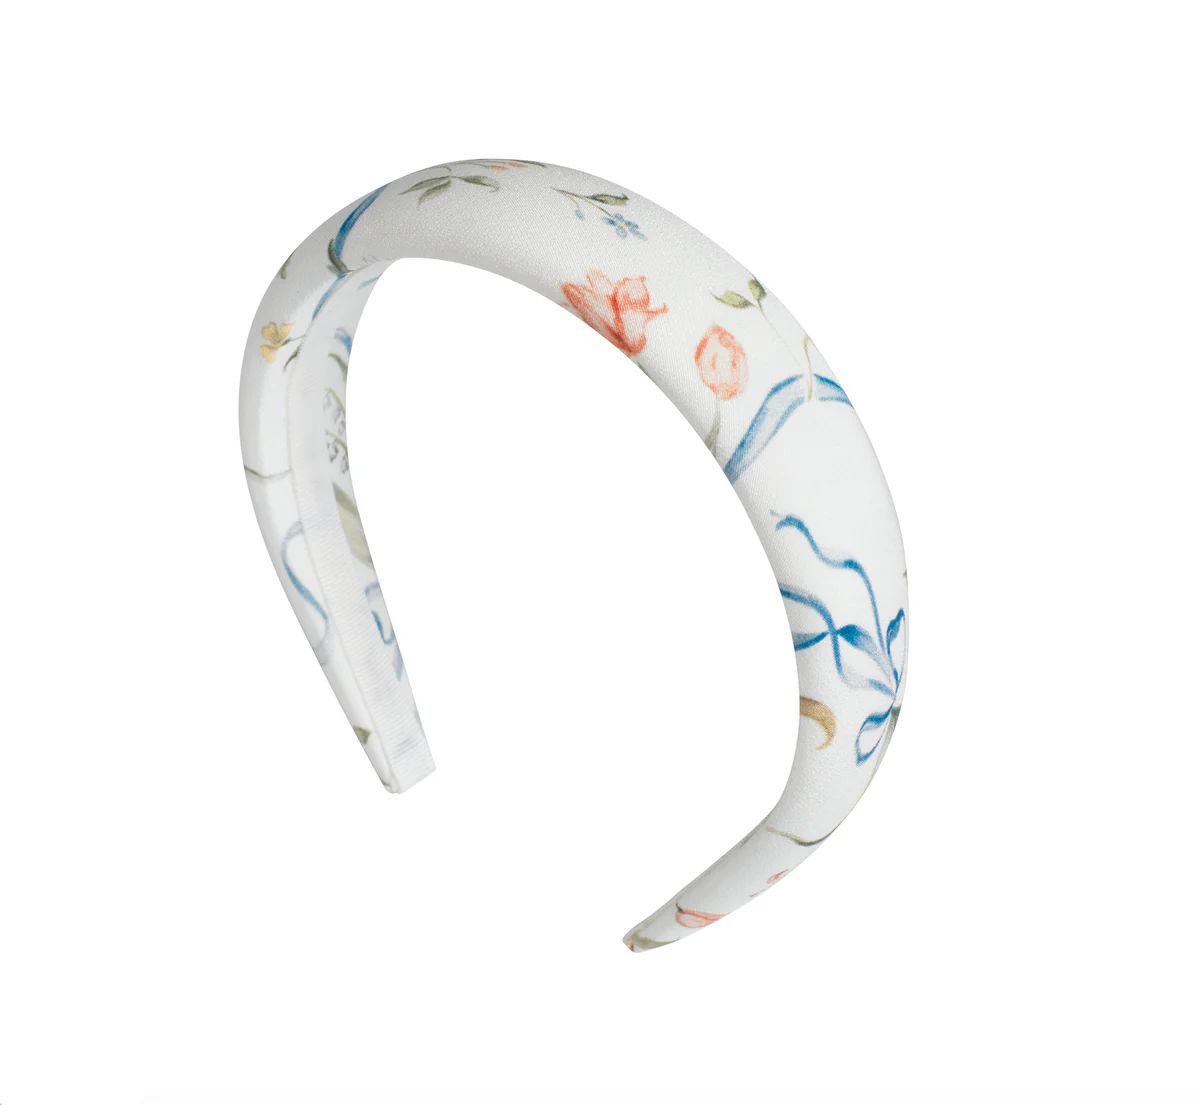 Riley Sheehey x Refine: The Headband in Ivory | Over The Moon